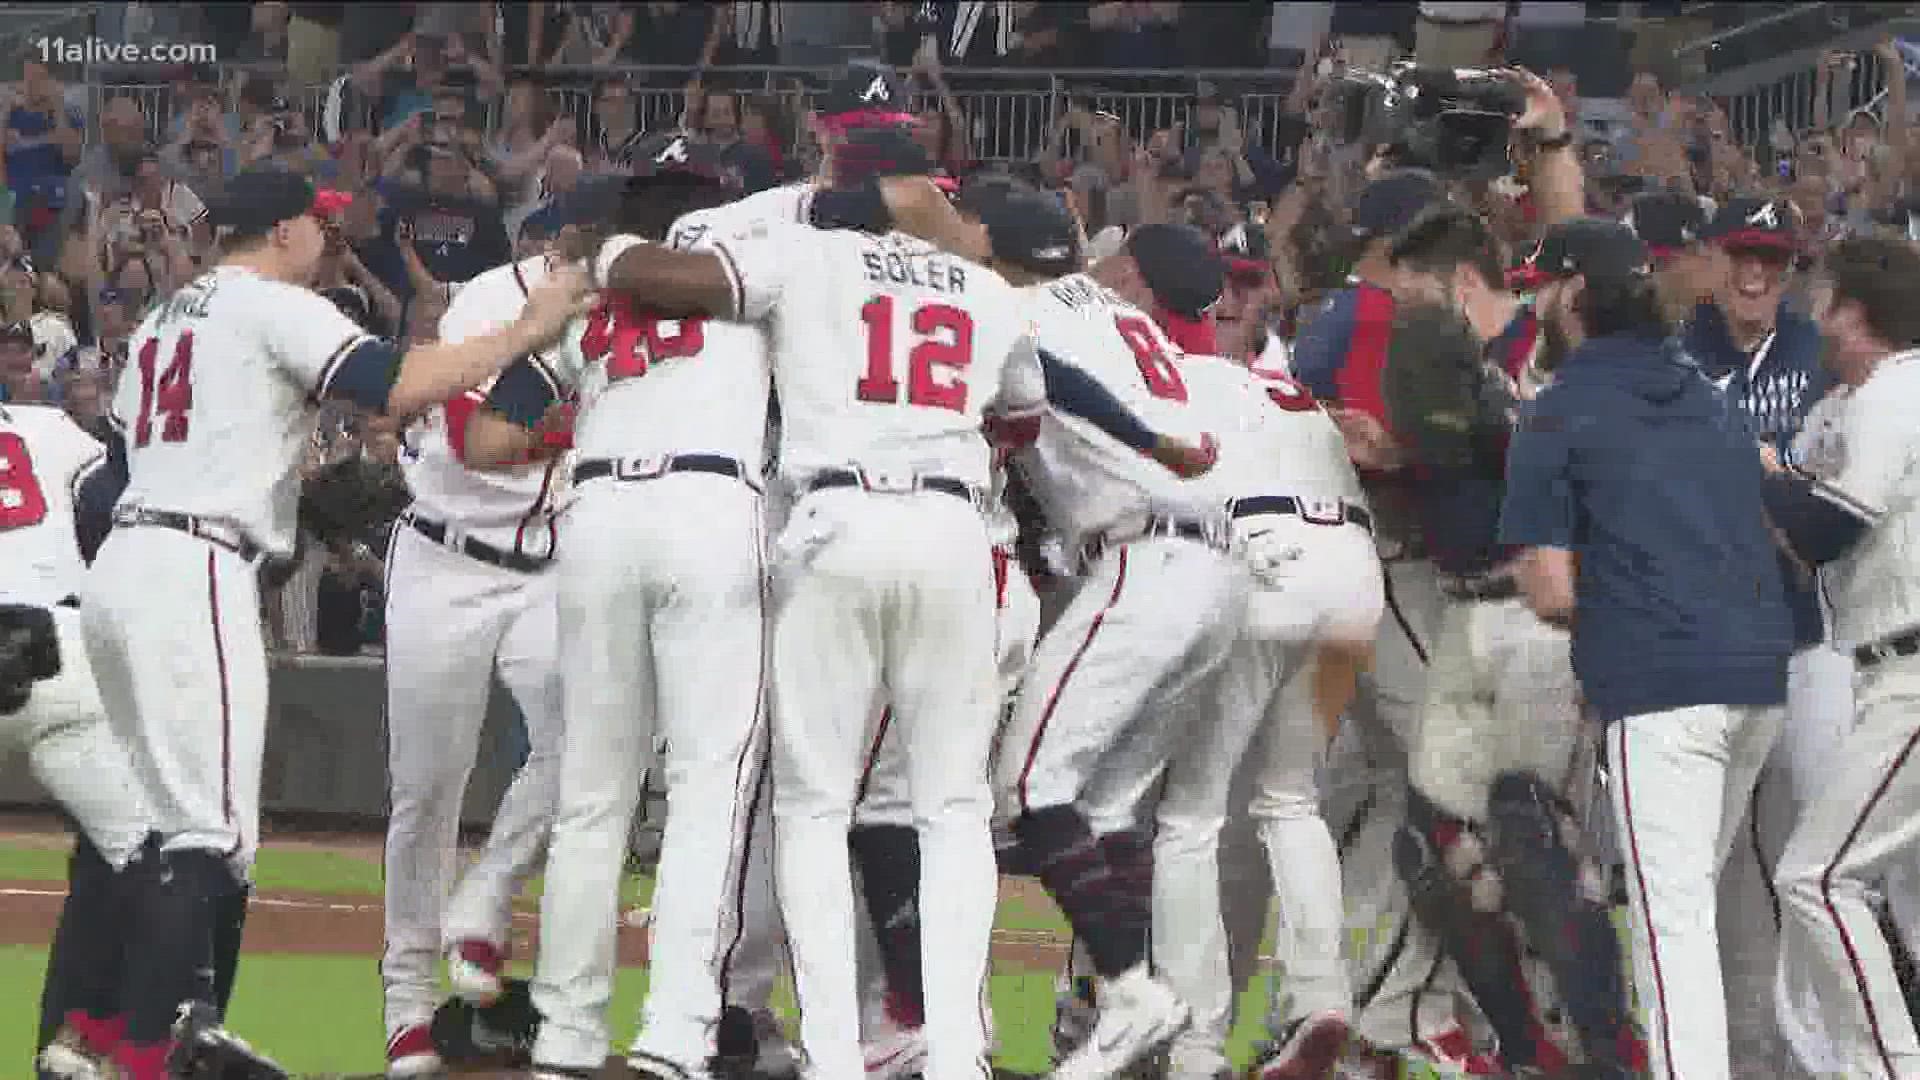 The Atlanta Braves beat the Philadelphia Phillies with a 5-3 victory Thursday night.